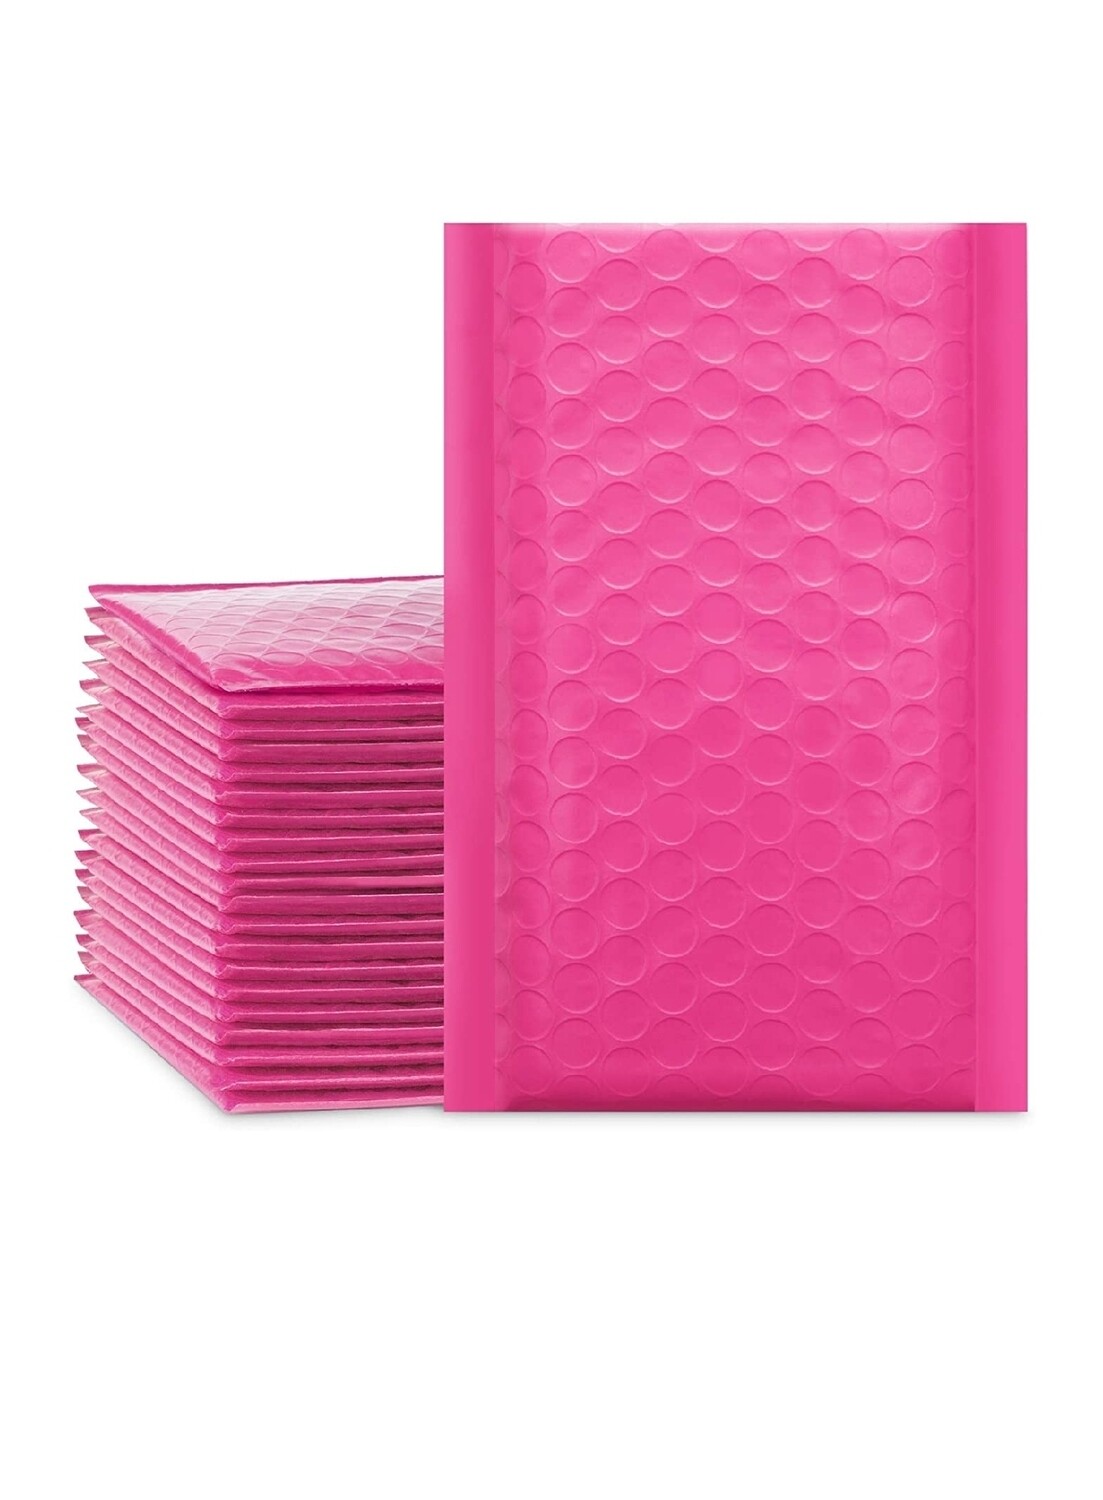 4x8 Inch pink Poly Bubble Mailers Padded Envelopes